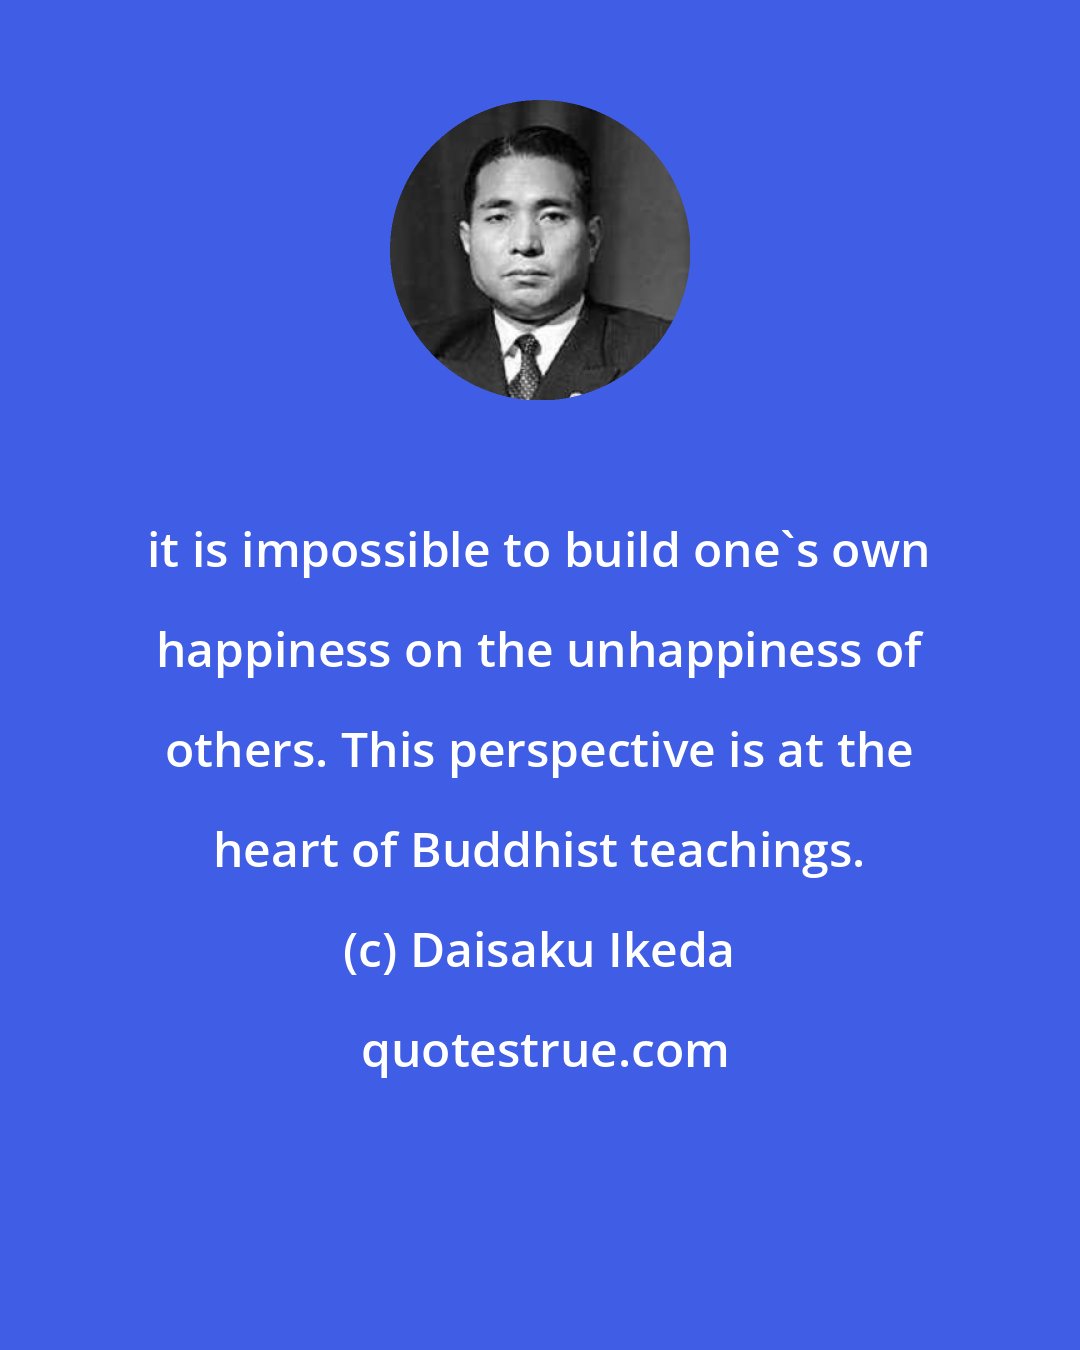 Daisaku Ikeda: it is impossible to build one's own happiness on the unhappiness of others. This perspective is at the heart of Buddhist teachings.